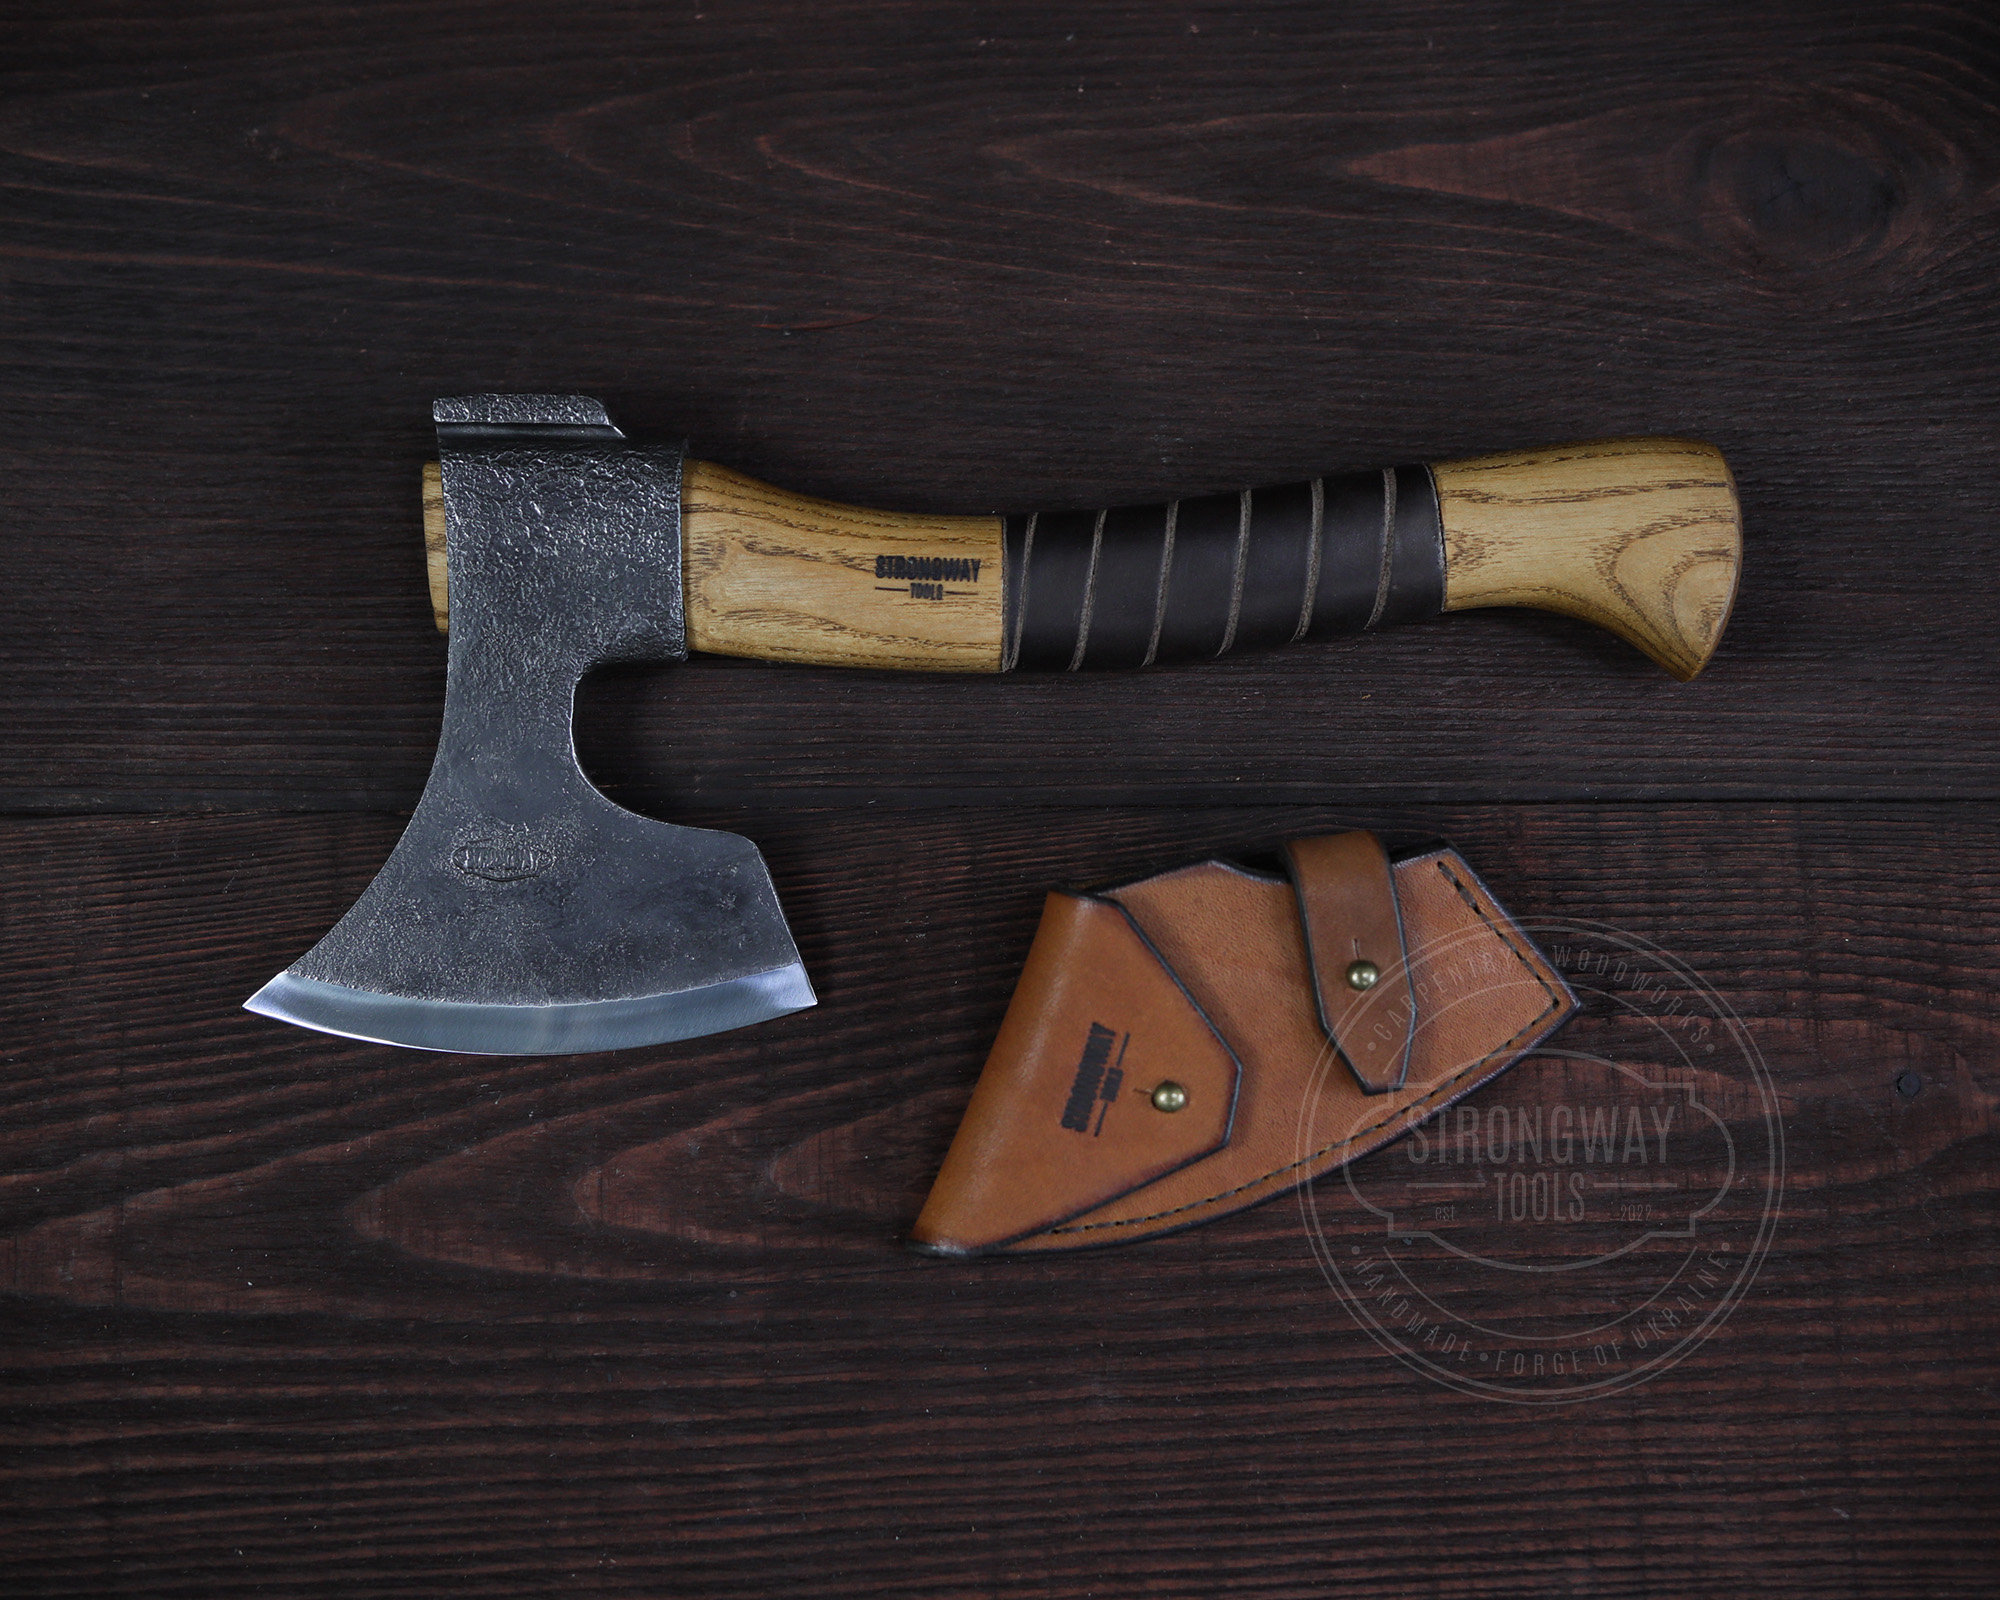 Small Finnish Carving Axe with octagonal handle